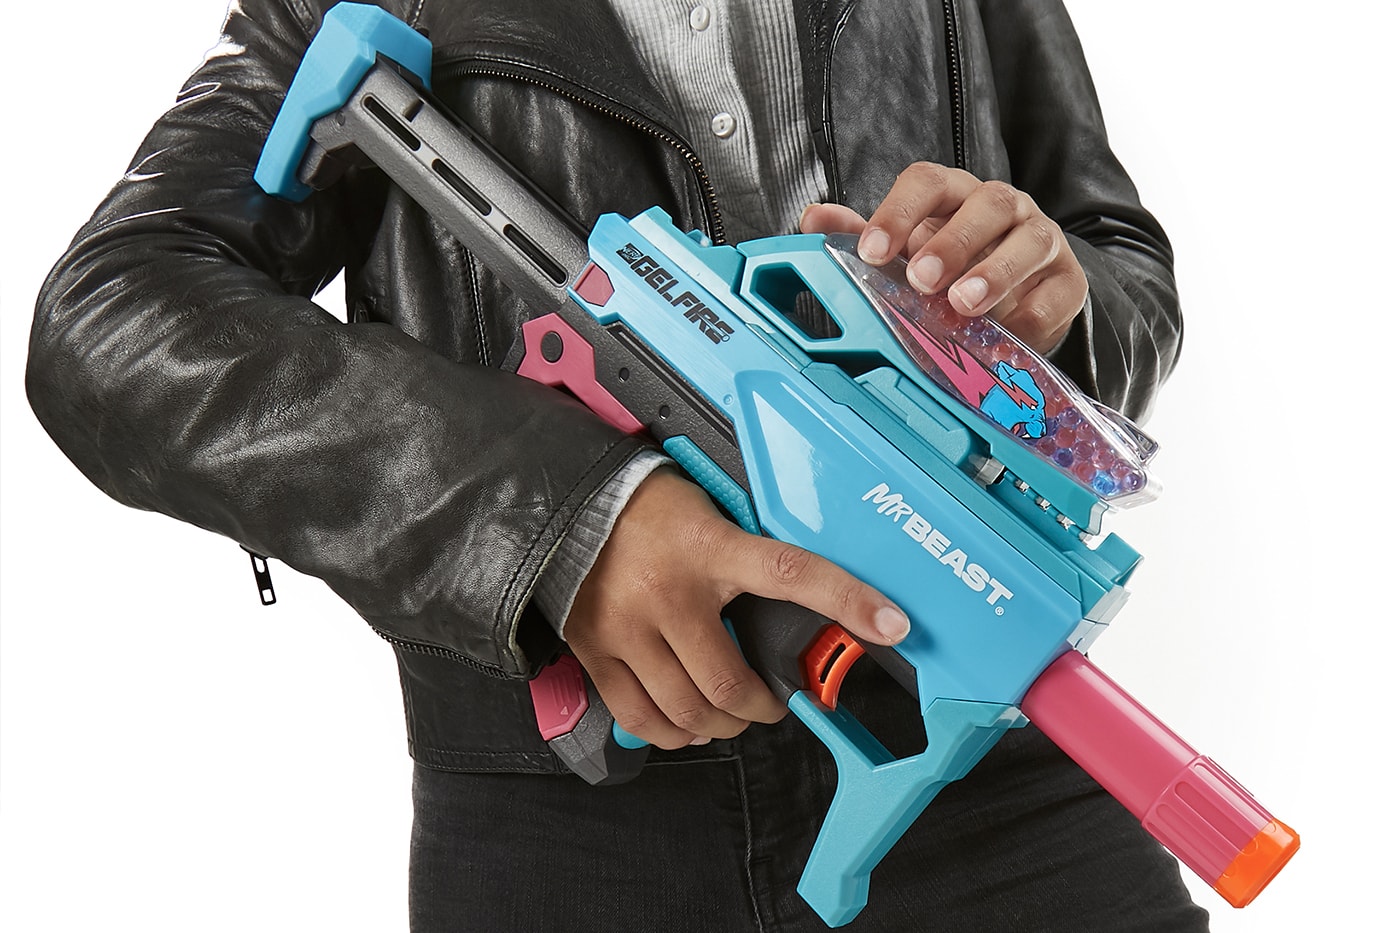 Nerf's New High-Powered Gel Blaster Debuts Ammo That Bursts on